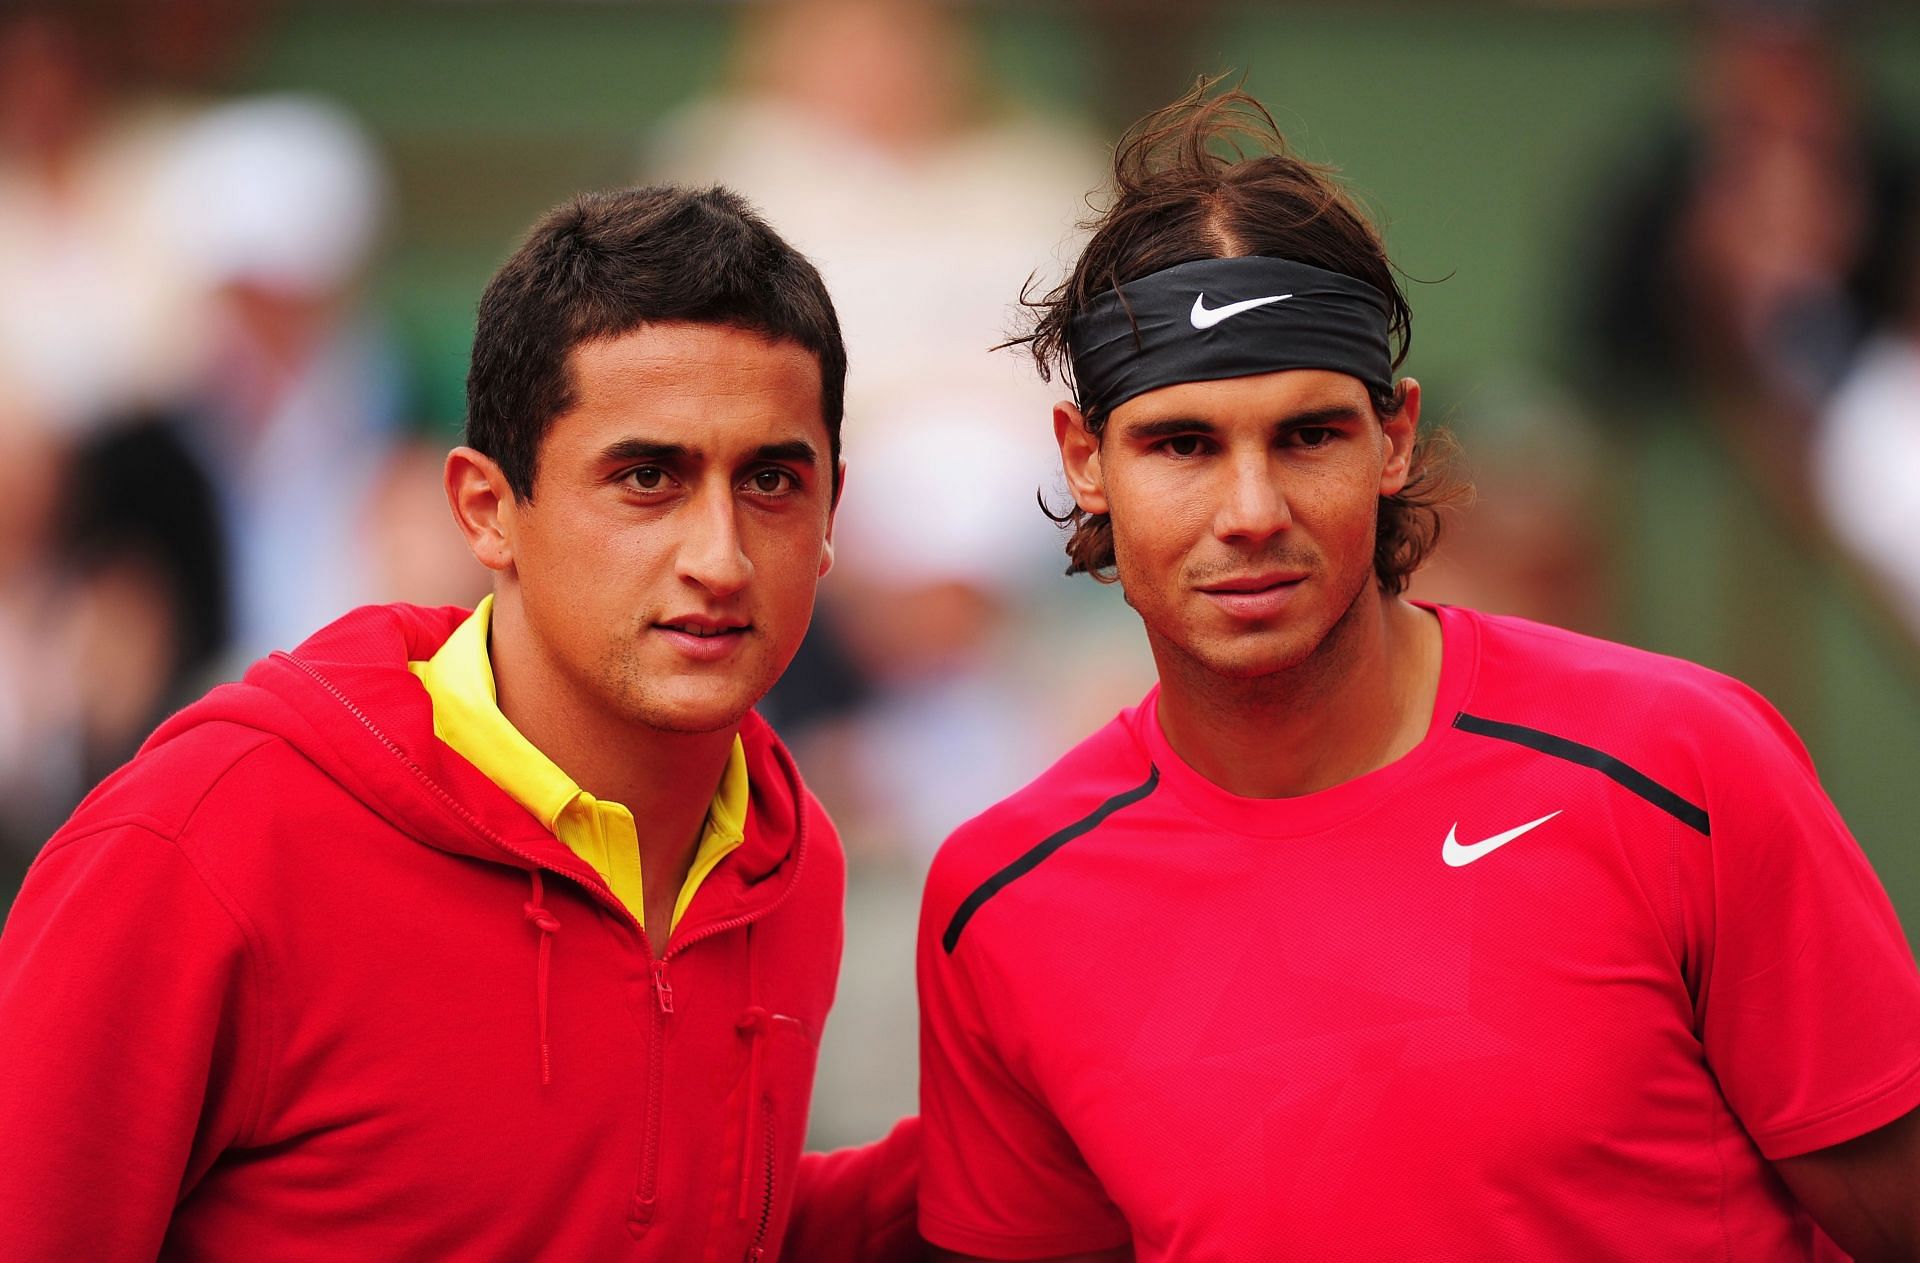 Nicolas Almagro (left) and Rafael Nadal (right) pose prior to their quarterfinal tussle in the 2012 French Open.